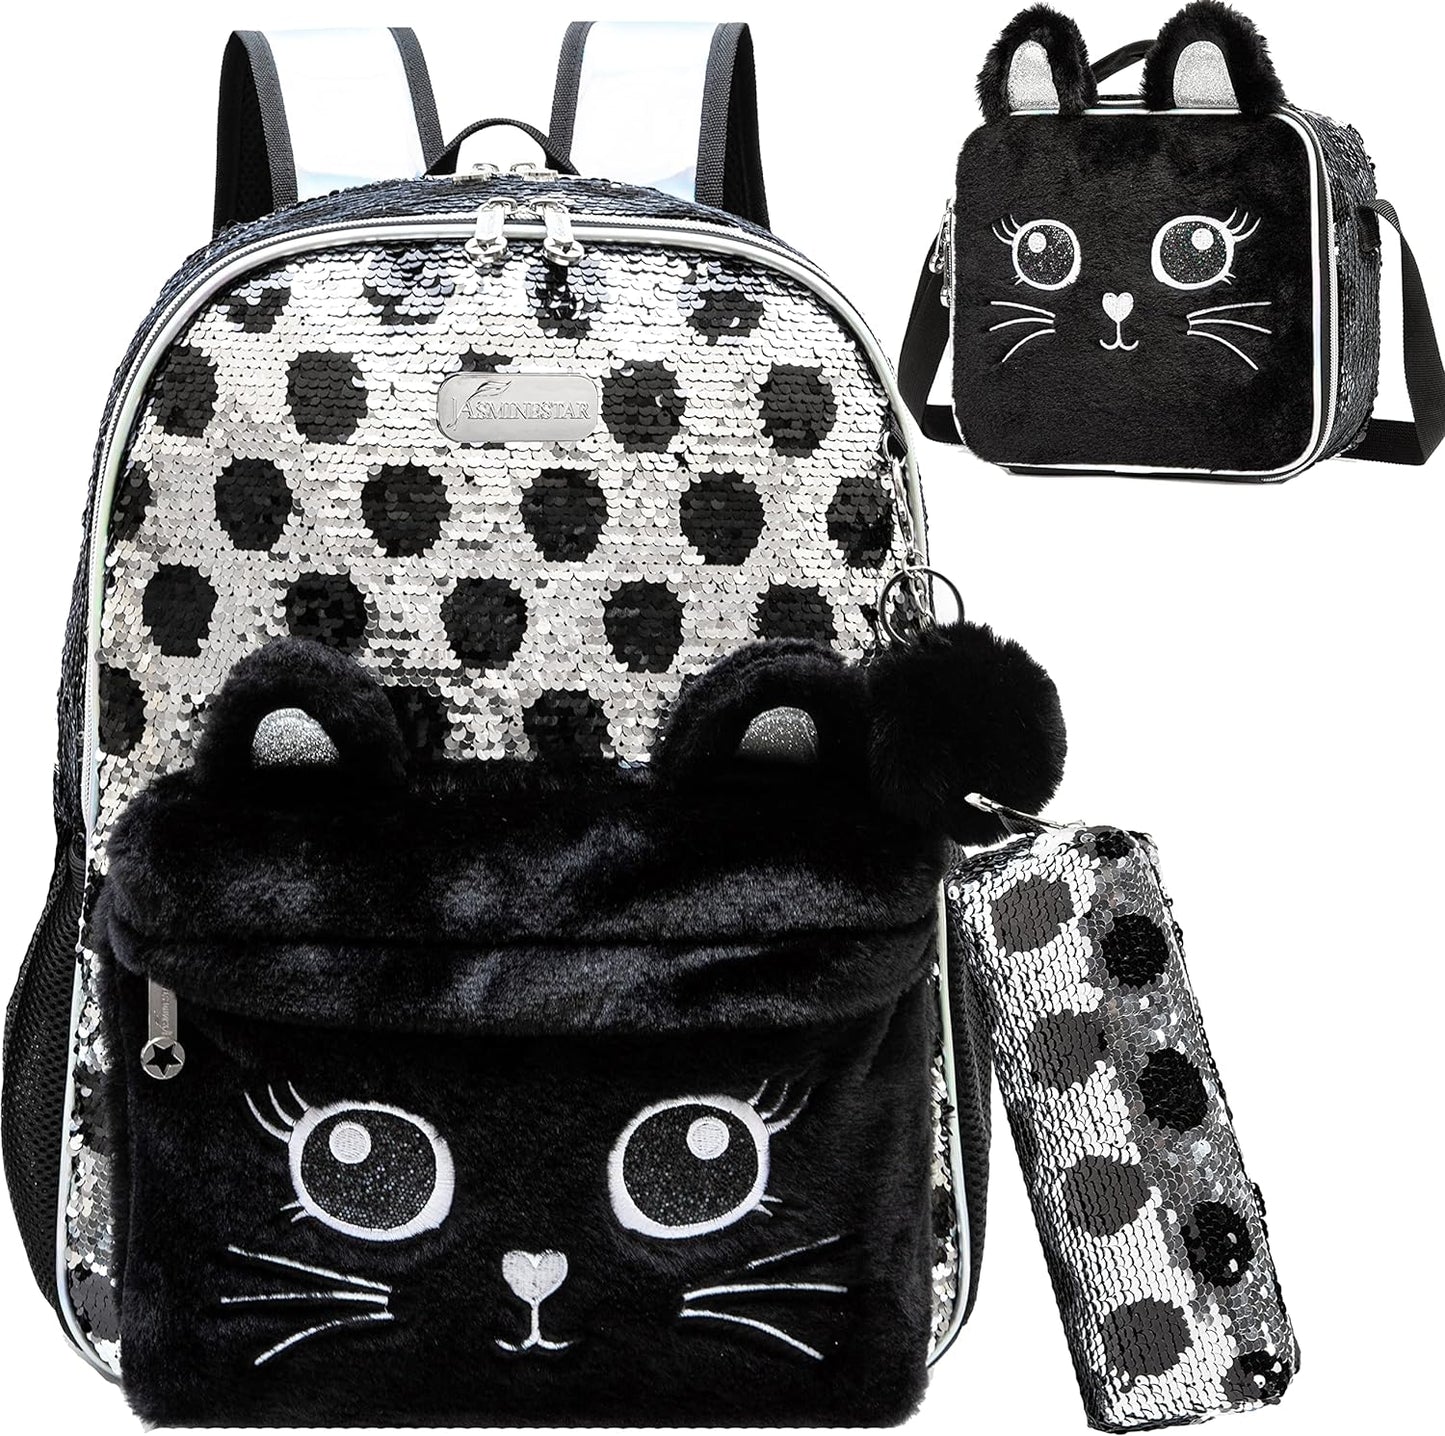 Cute Cat Backpack for Girls Sequin School Backpacks with Lunch Box for Elementary Students Kids Travel Bookbag Set 4 in 1